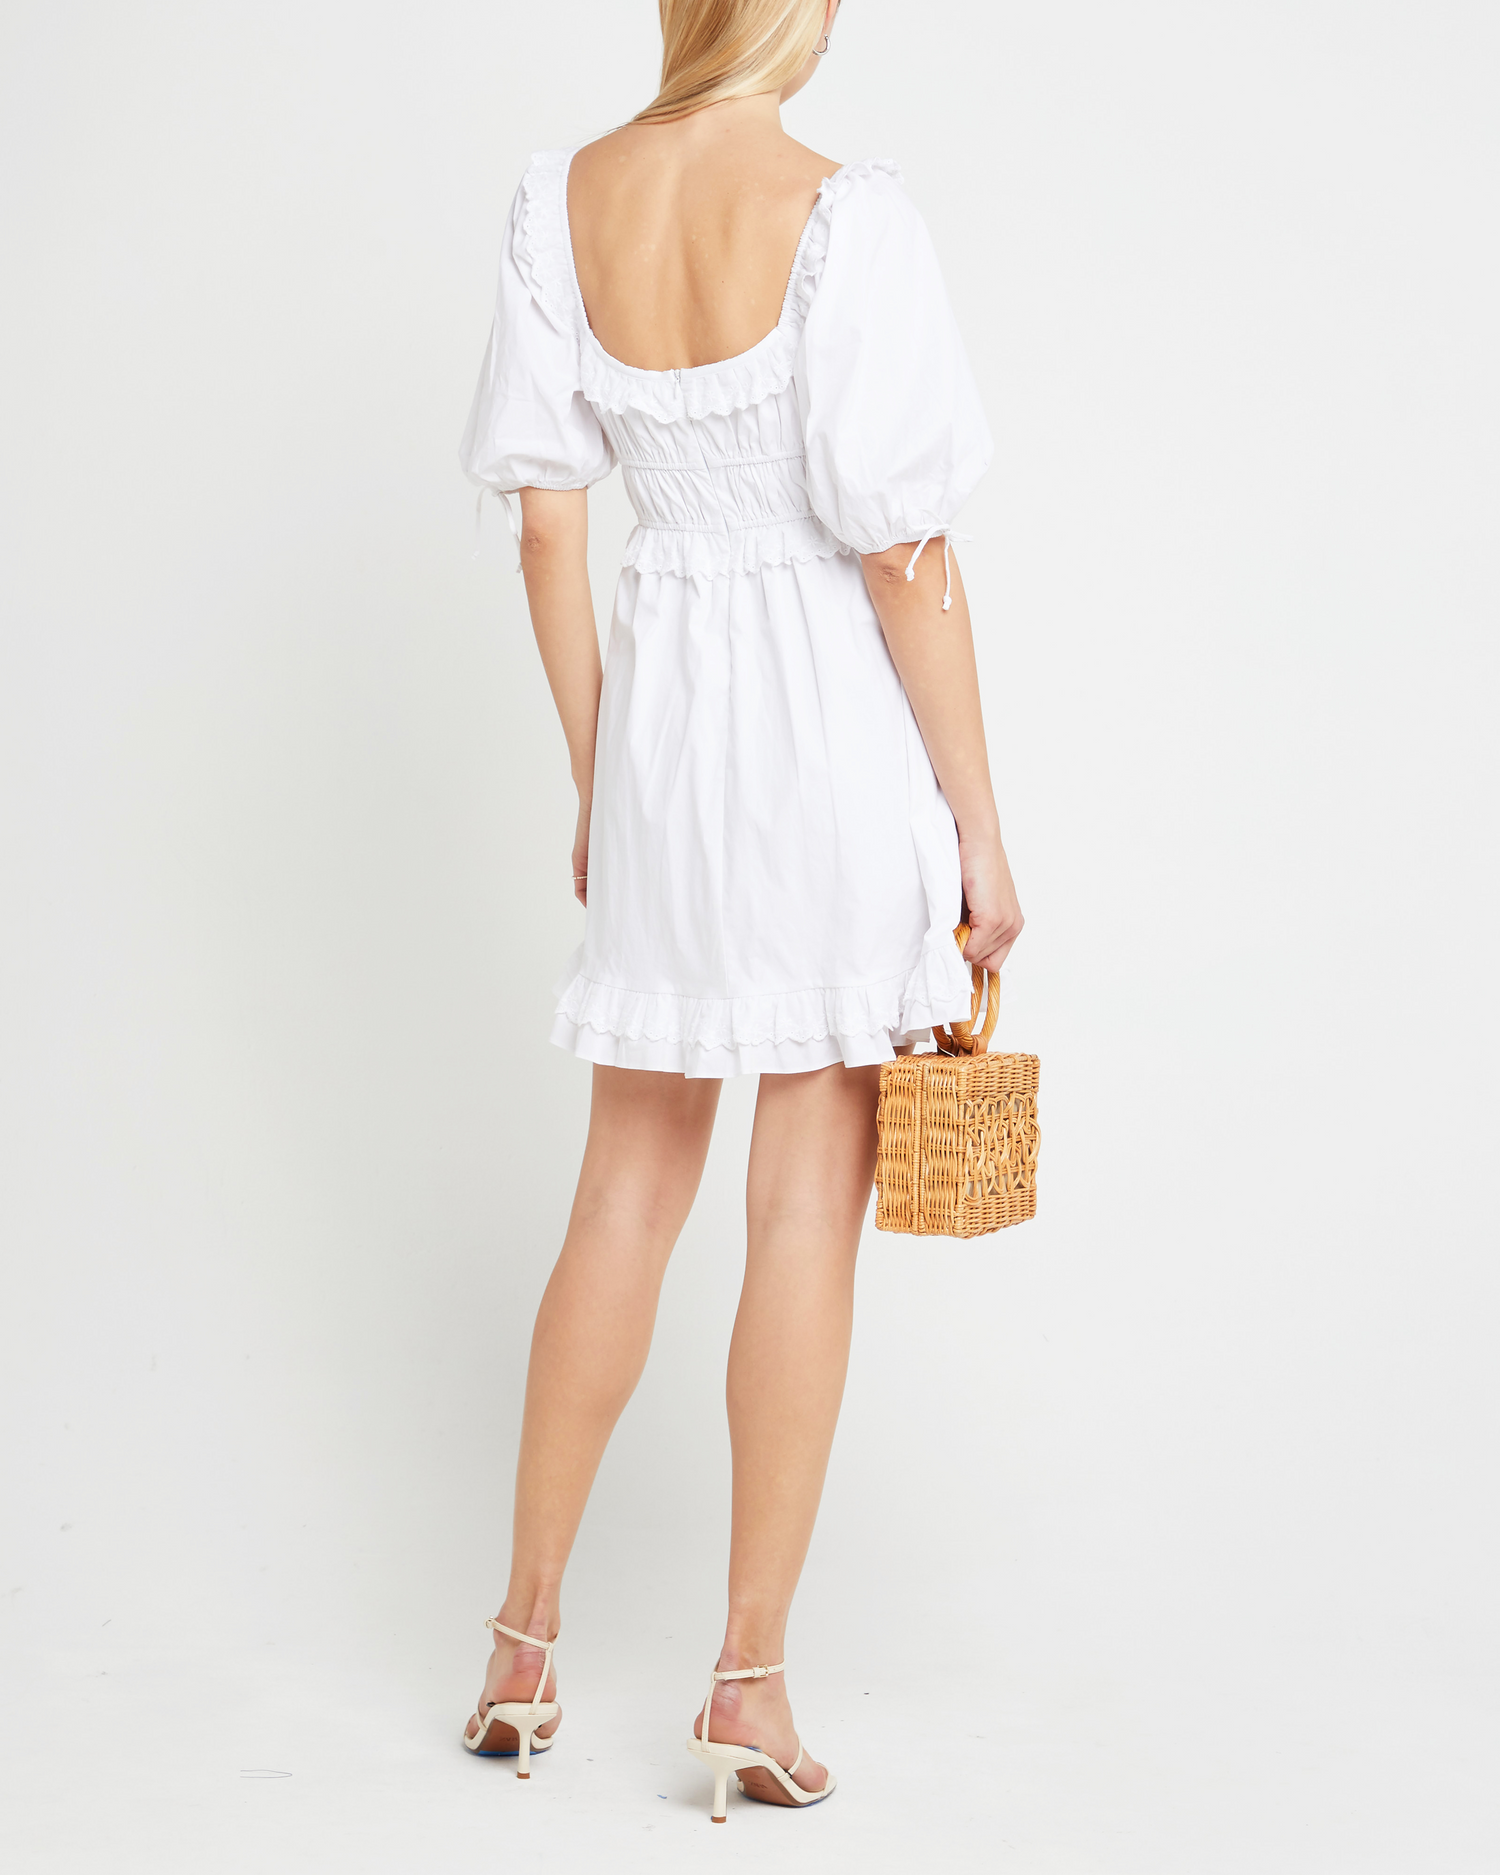 Fifth image of Lucia Dress, a white mini dress, puff sleeve, ruffe detail, lace, scoop neck